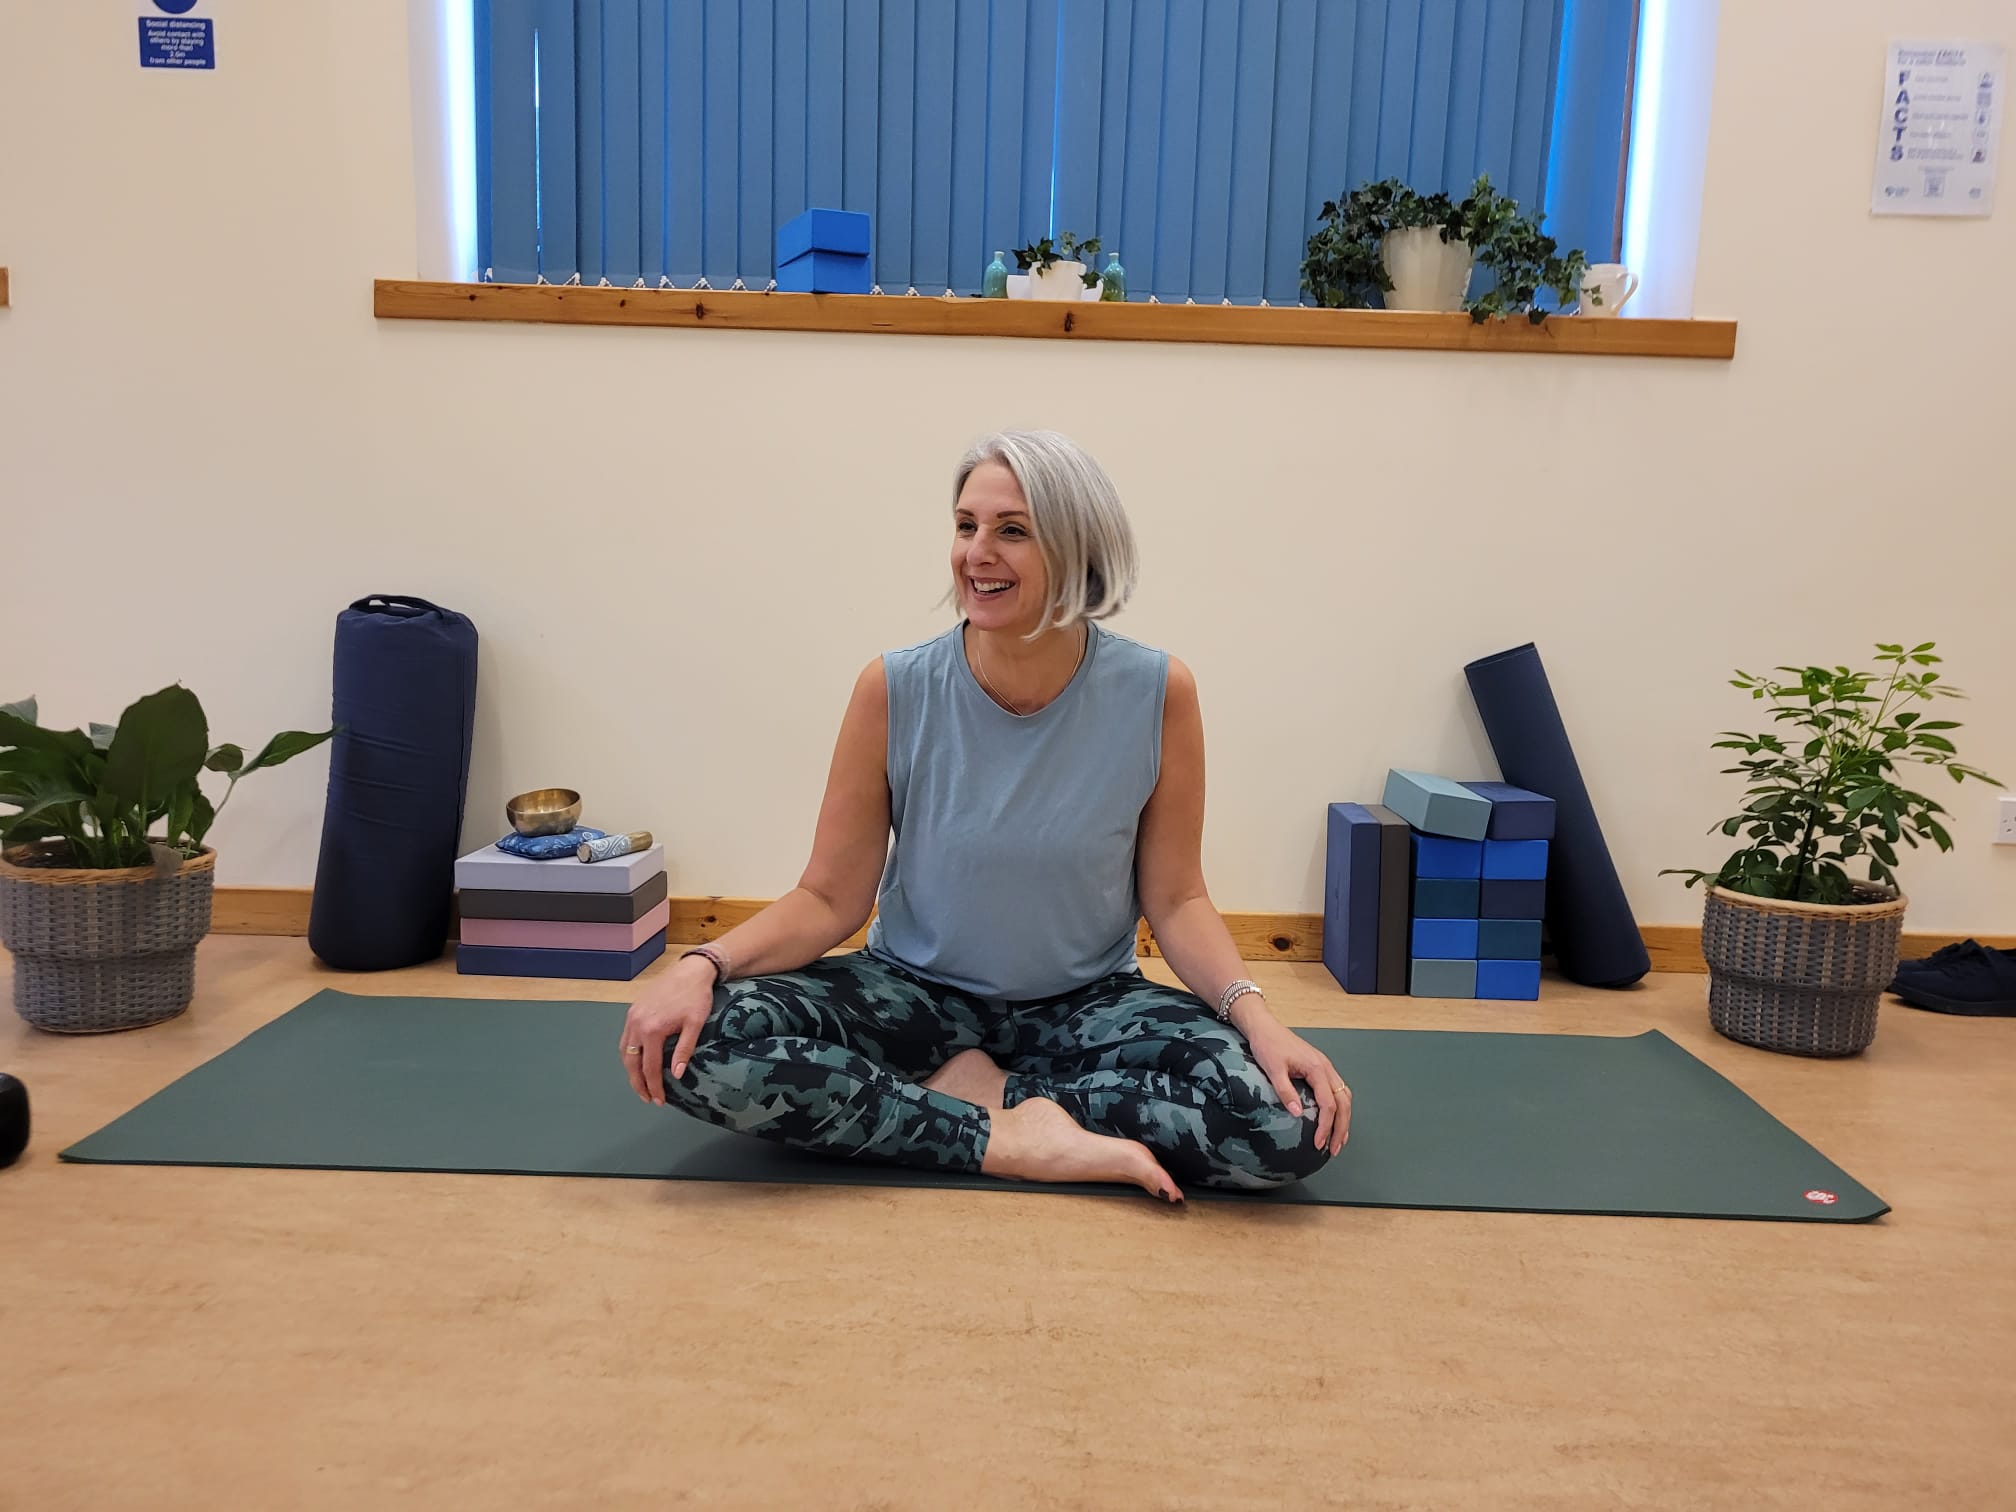 Person sitting on a yoga mat with legs crossed.